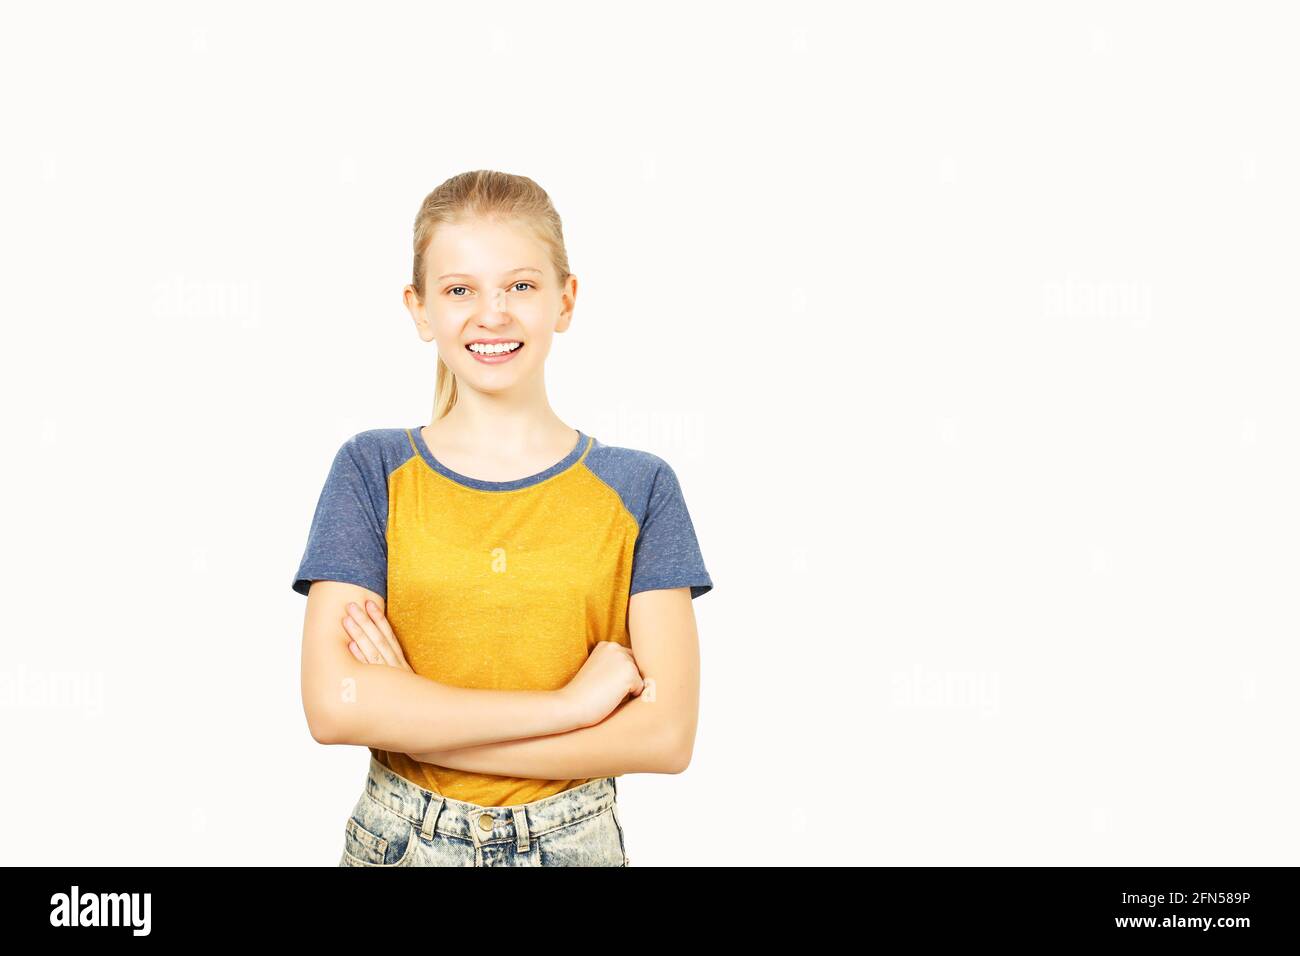 Young beautiful teenage girl with blond hair in ponytail wearing yellow baseball t-shirt with blue sleeves. Pretty female smiling with folded hands st Stock Photo